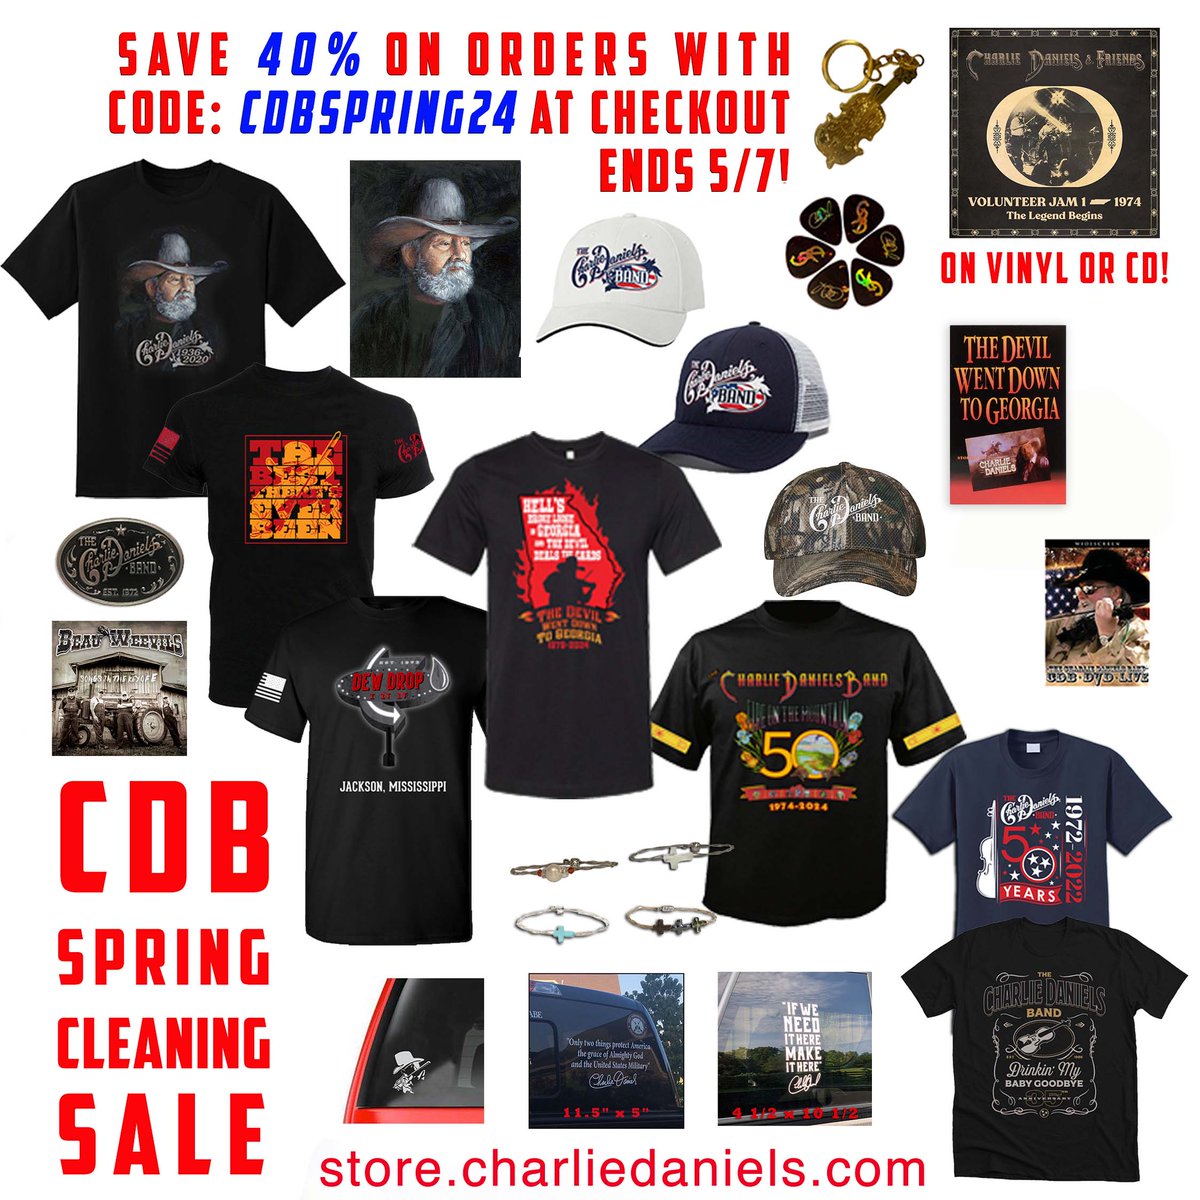 It's time for the CDB Spring Cleaning Sale! We need to make room for exciting new designs in the works for 2024 Simple Man 35 & VolJam 50, etc... Save 40% on all orders with code CDBSPRING24 at checkout! Ends 5/7 Shop Now: bit.ly/cdbstore - TeamCDB